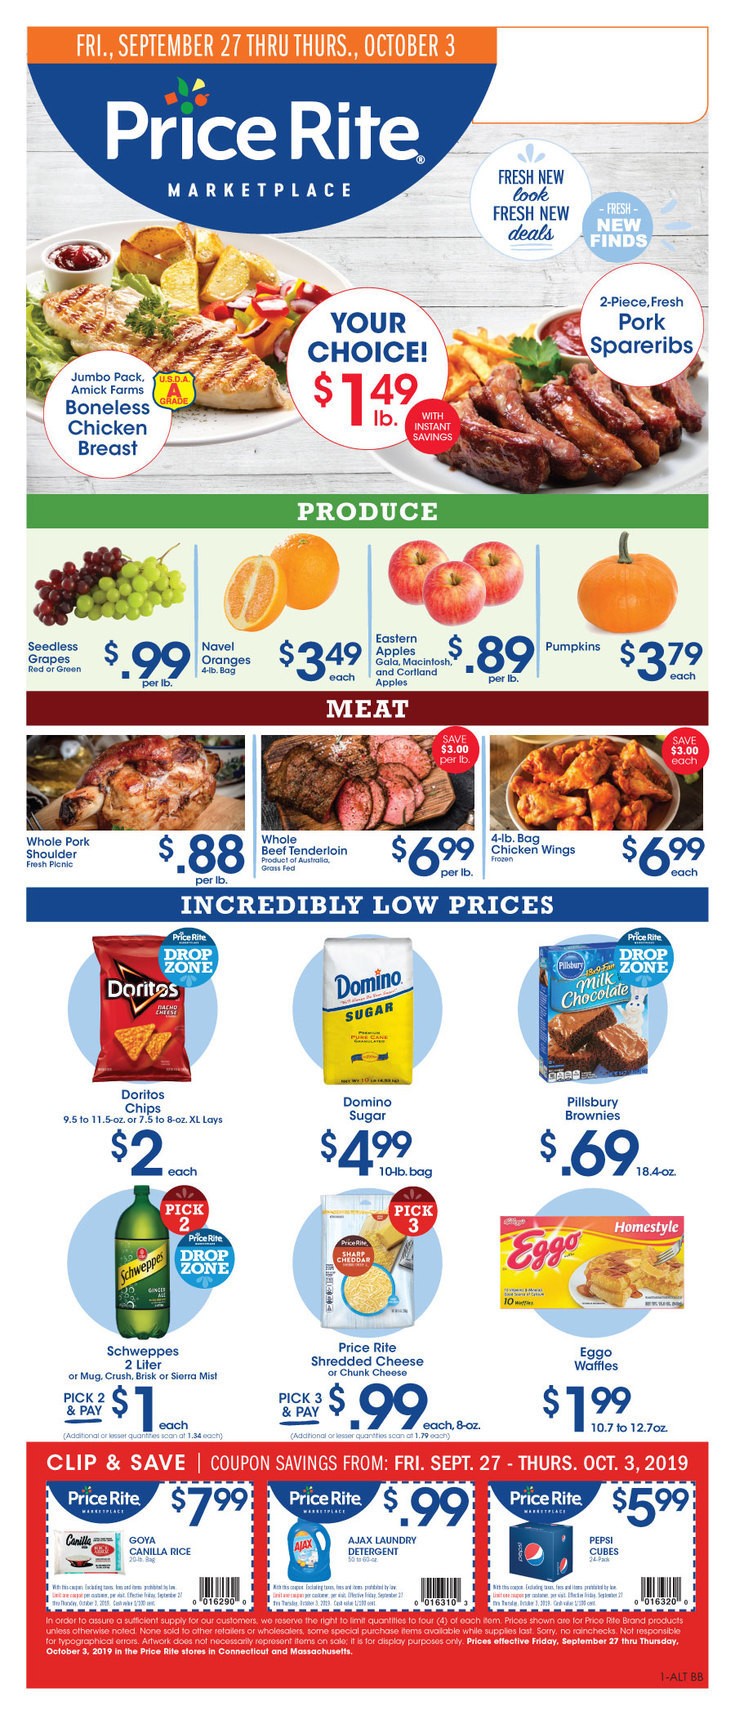 Price Rite Weekly Ad from September 27